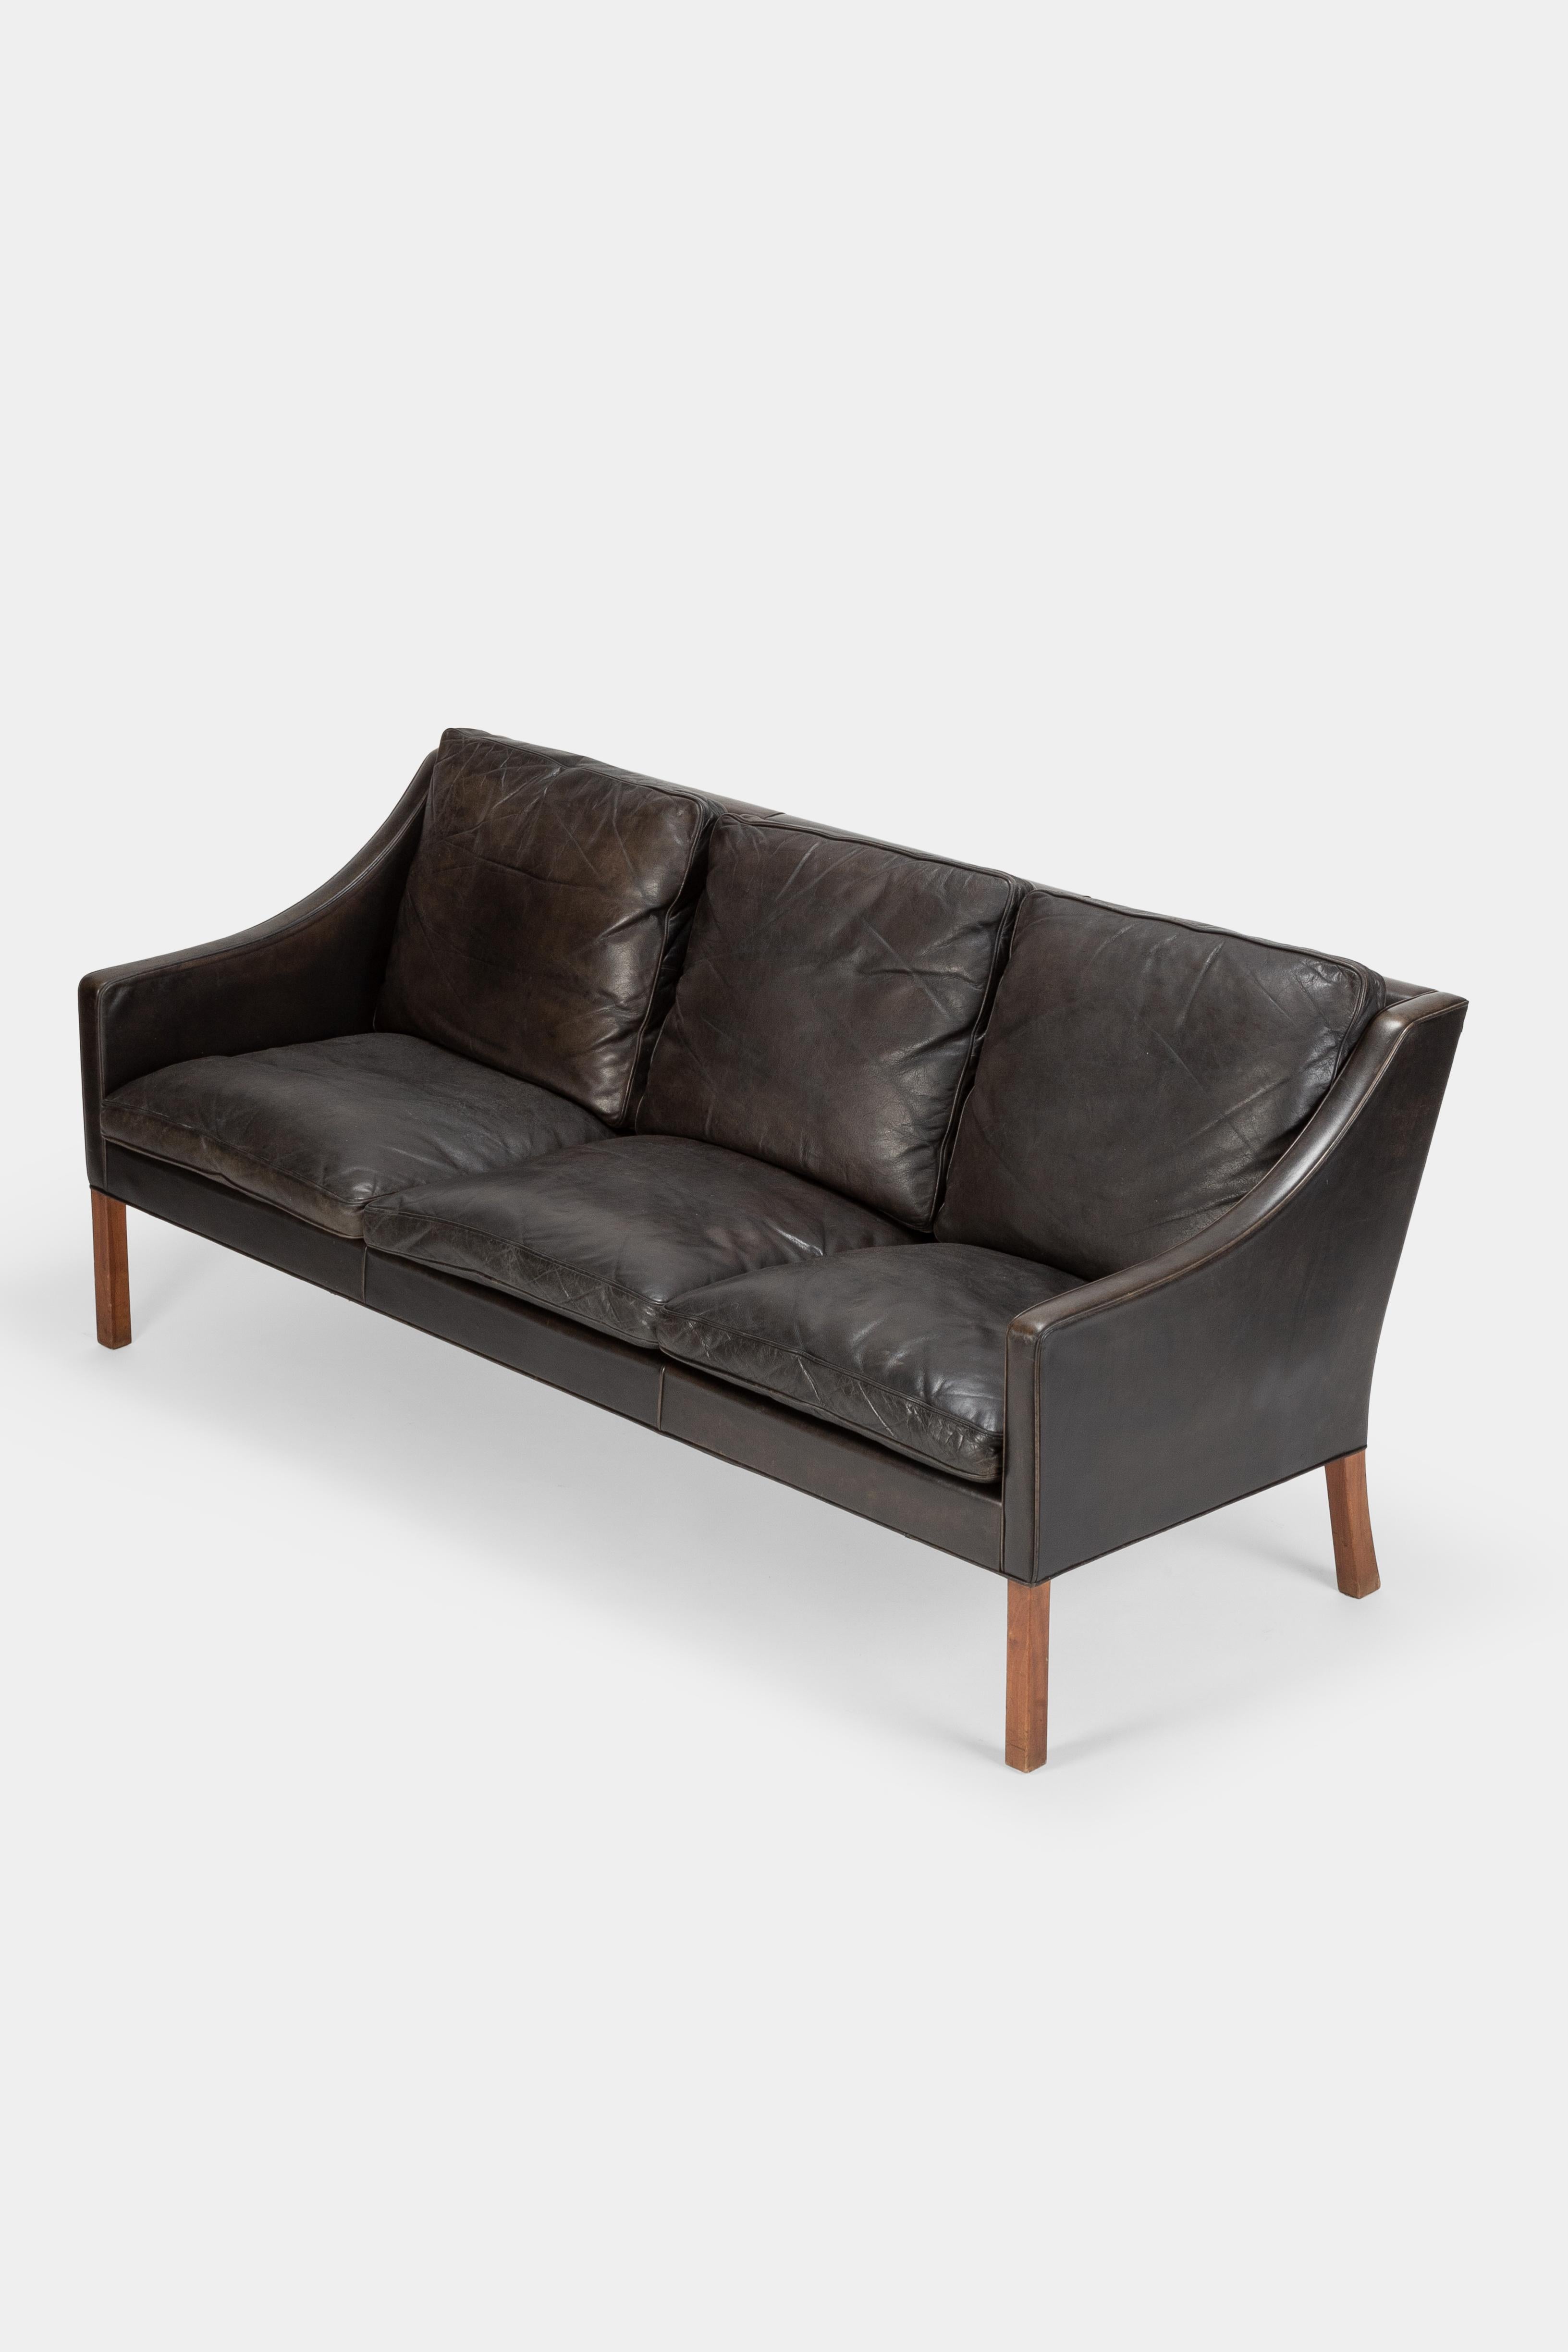 Borge Mogensen 3-seat sofa model 2209 manufactured by Fredericia in the 1960s in Denmark. Covered with black leather which has a stricking patina. The legs are made of solid oak wood.